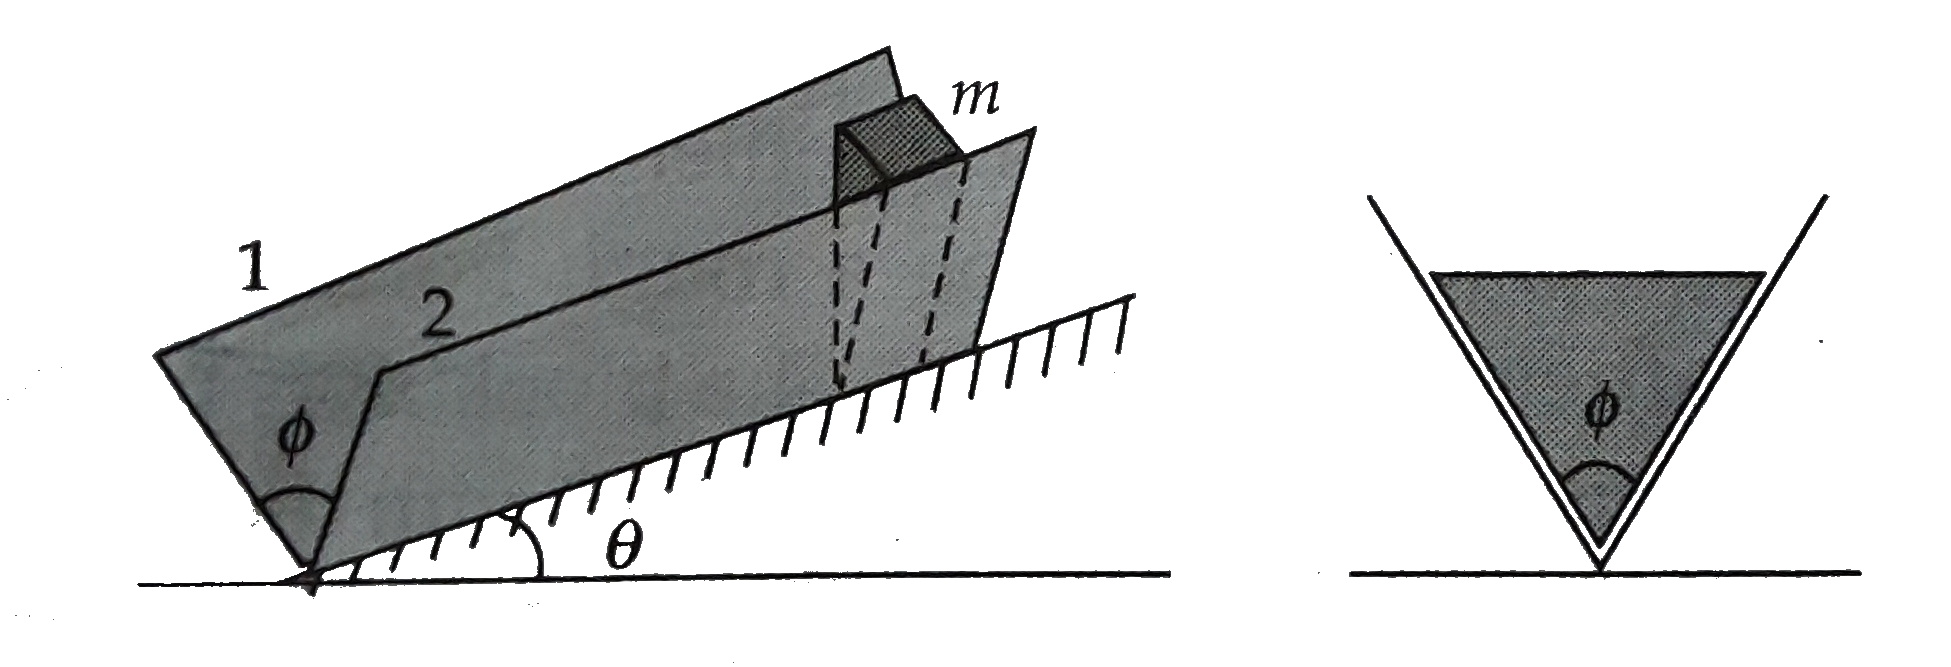 A prismatic block of mass m is kept on a groove . The bottom line of the groove makes an angle theta with horizontal . The angle between is phi If the groove is symmetrical with the normal to the inclined plane containing the bottom line of the groove      a. Find the coefficient of friction mu(0) between the block and groove so that the block begins to slide.   b. If mu gt mu(0)  find the friction force on the block.   c. If  mu lt mu(0)  find the acceleration of the block.